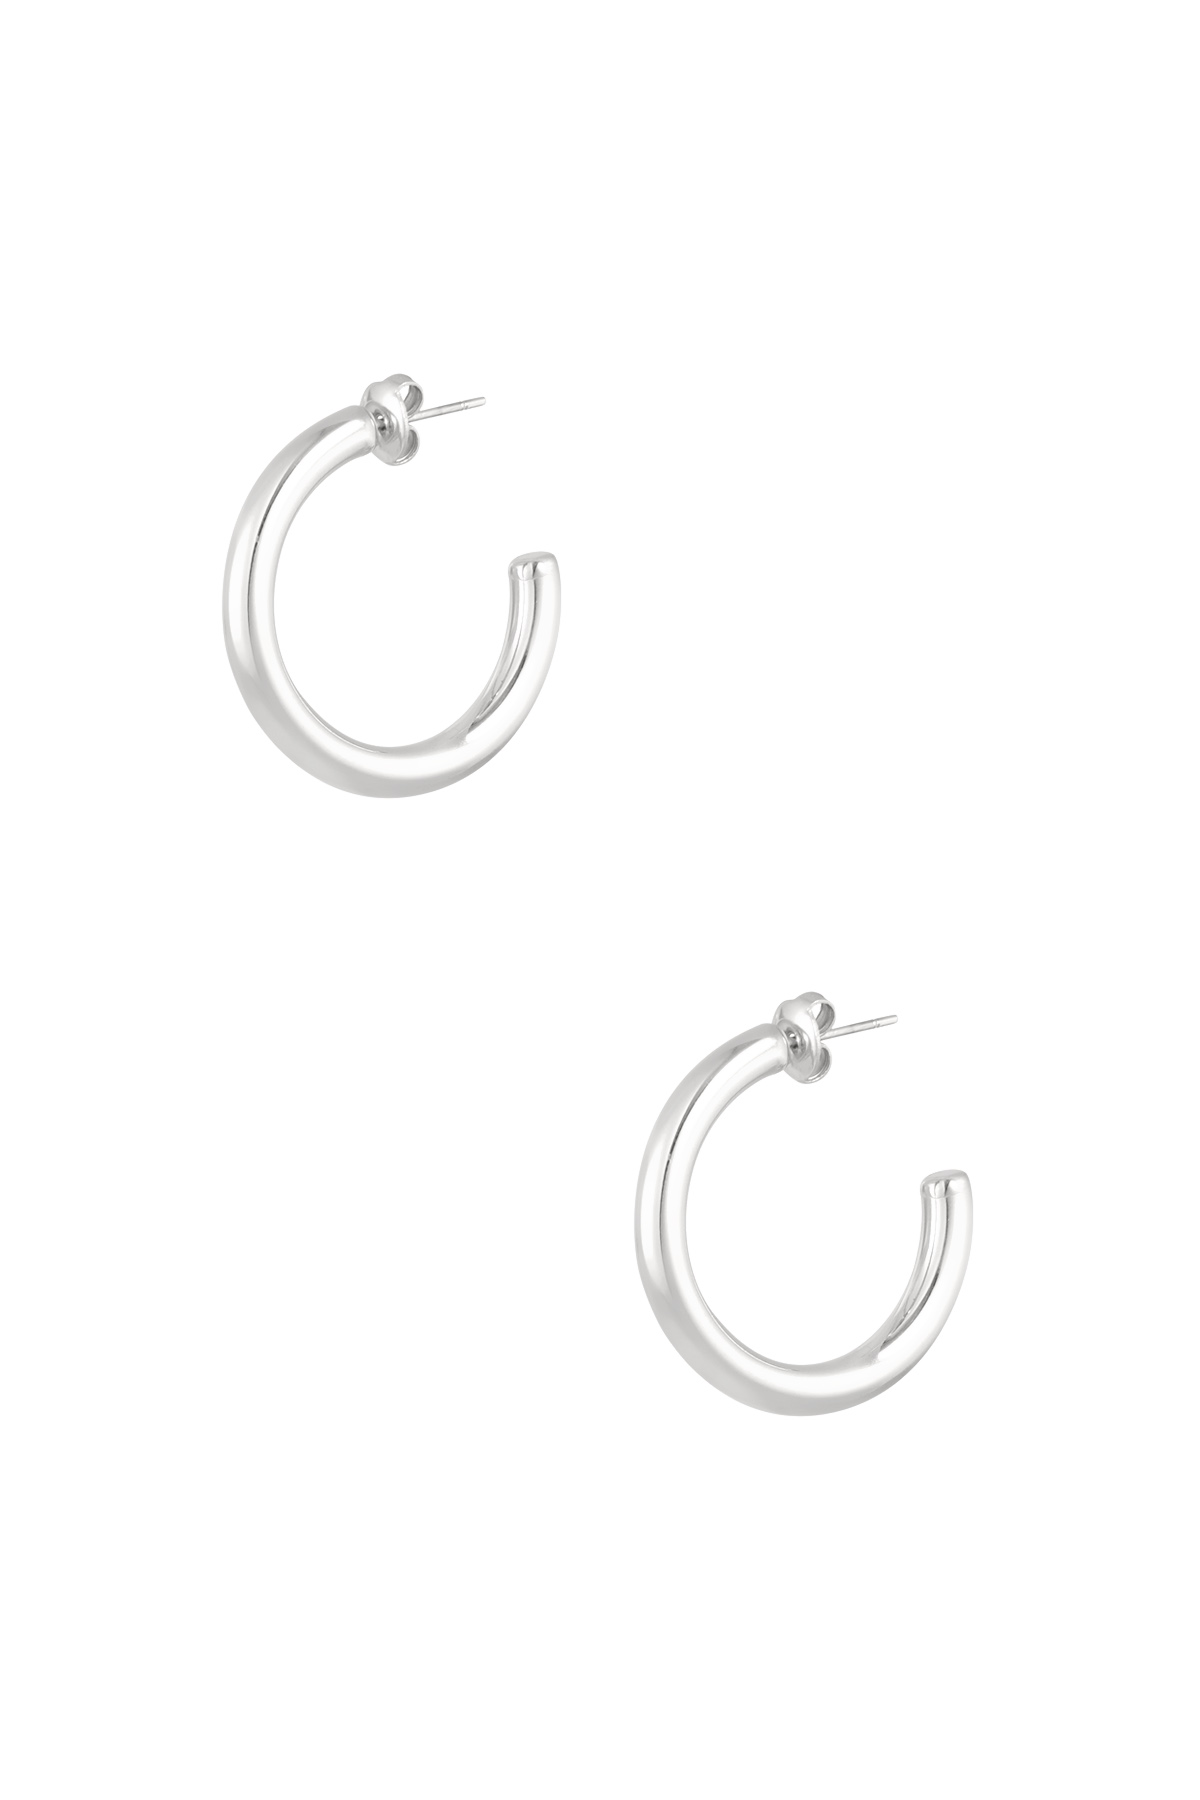 Earrings thick basic small - silver h5 